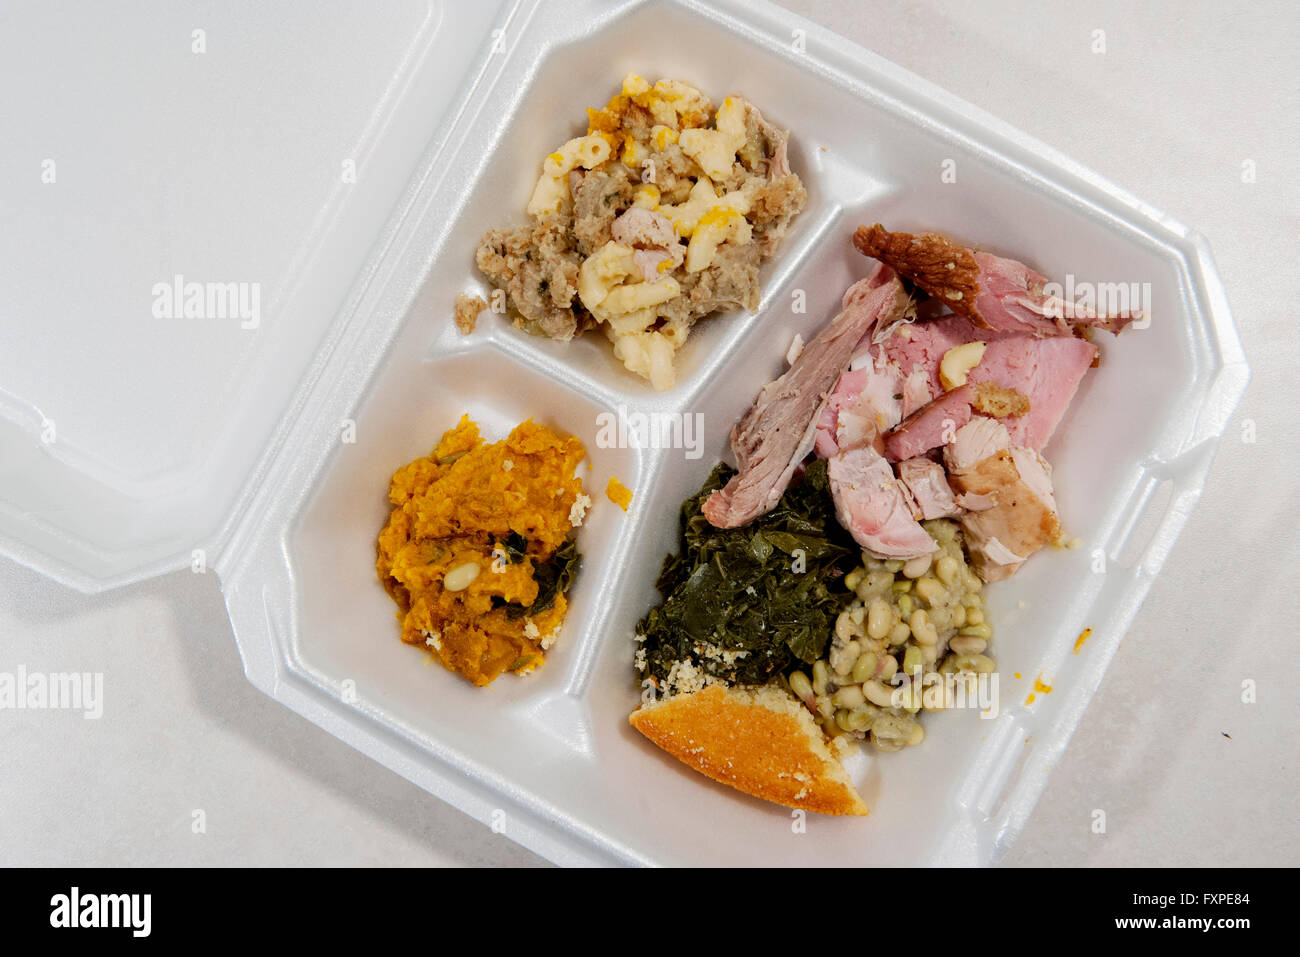 Takeout food in polystyrene container Stock Photo